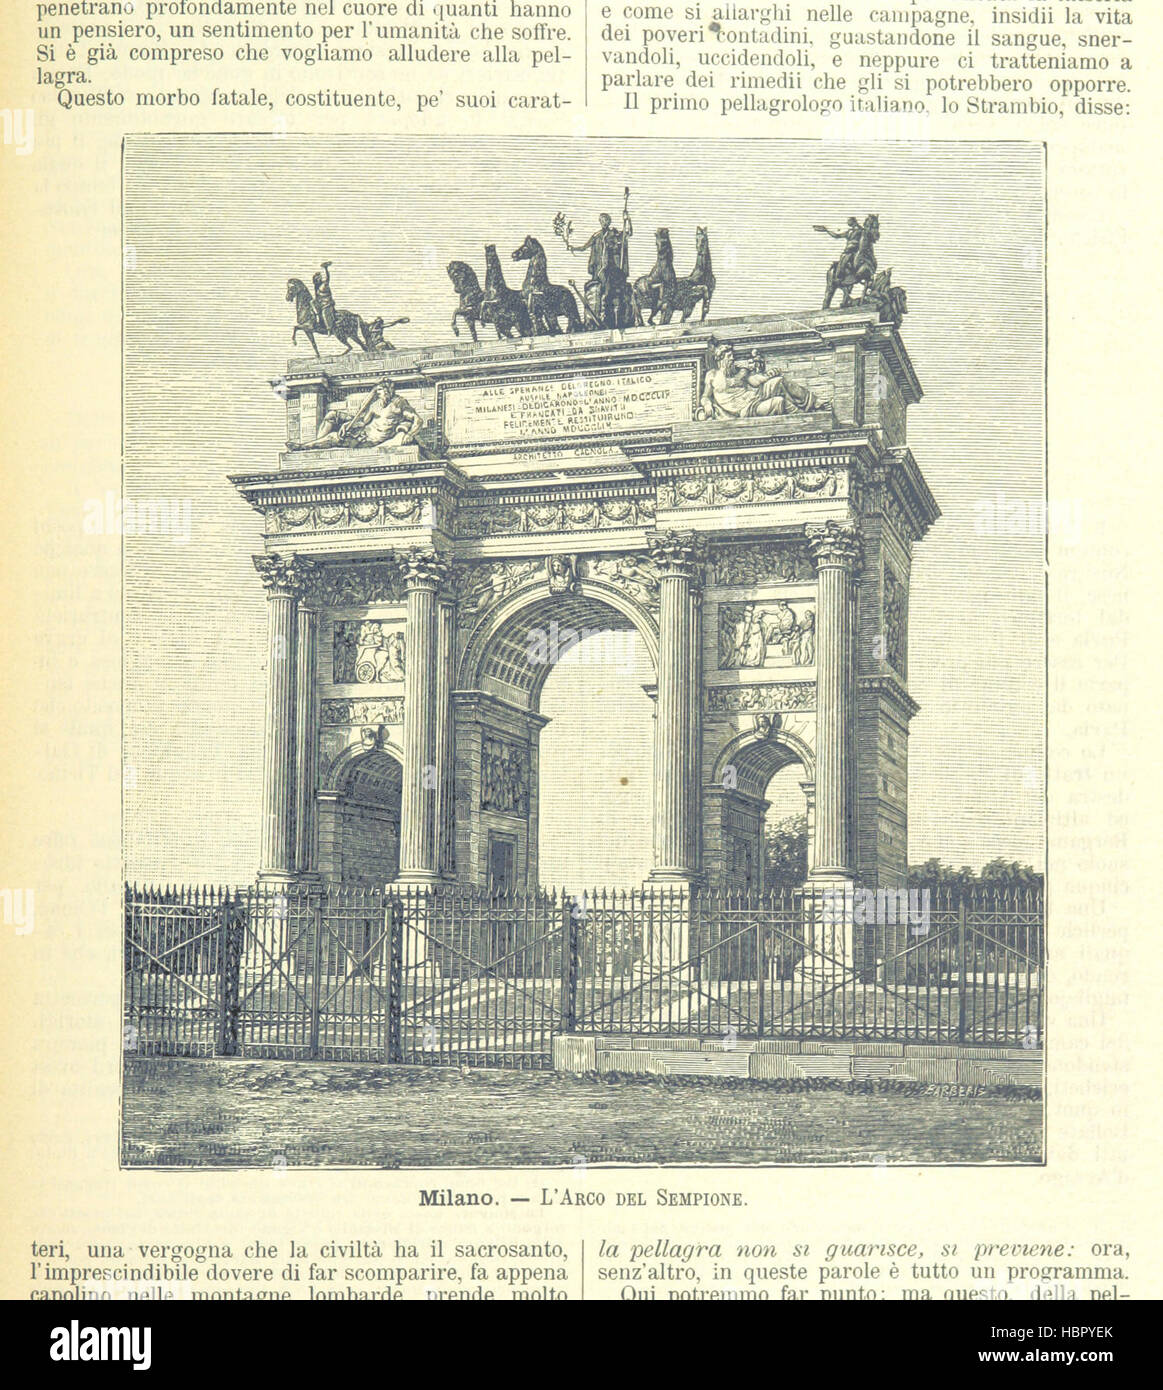 Image taken from page 567 of 'L'Italia geografica illustrata, etc' Image taken from page 567 of 'L'Italia geografica illustrata, etc' Stock Photo